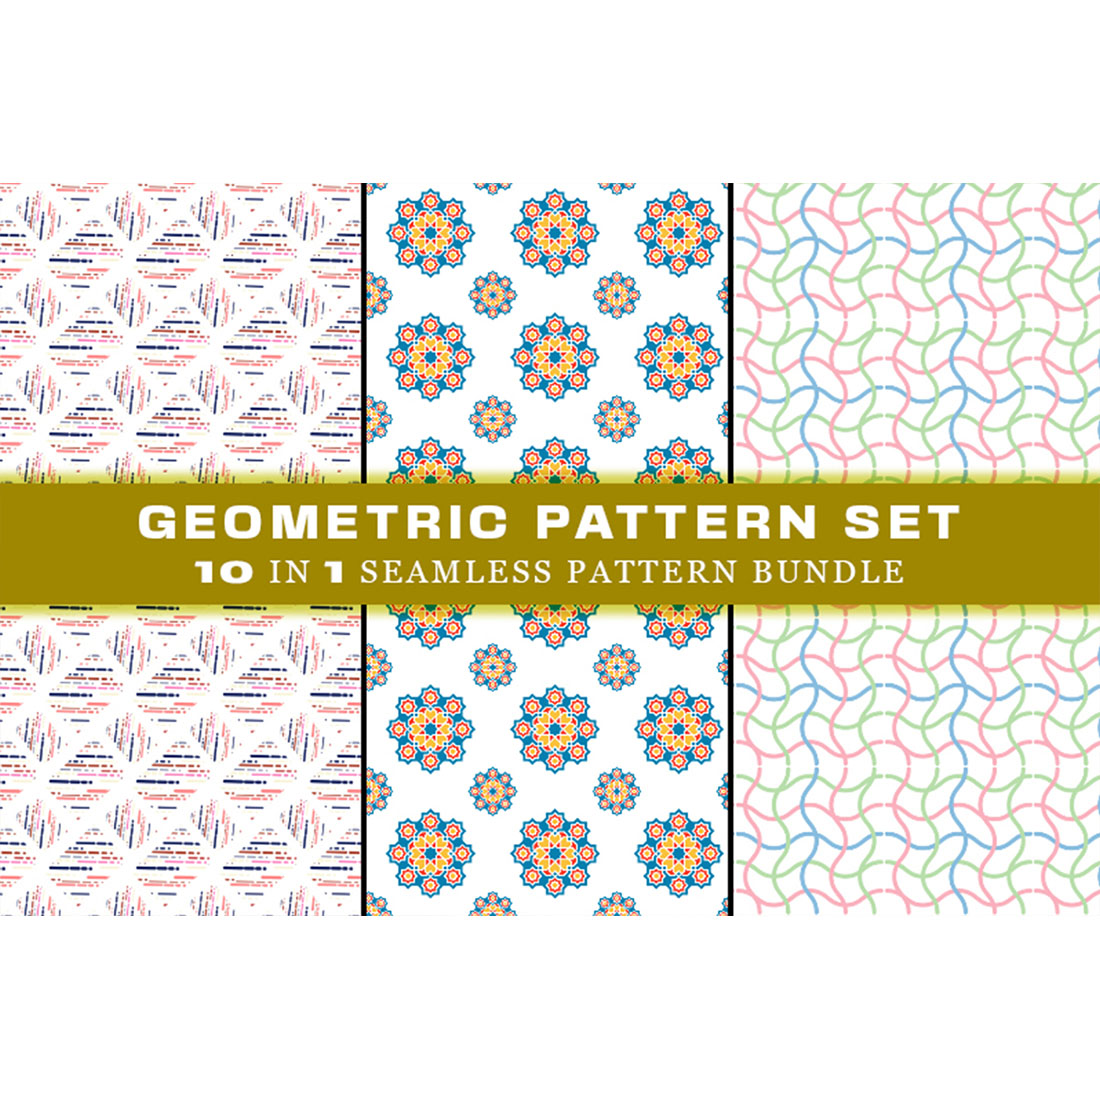 A selection of images of gorgeous geometric patterns